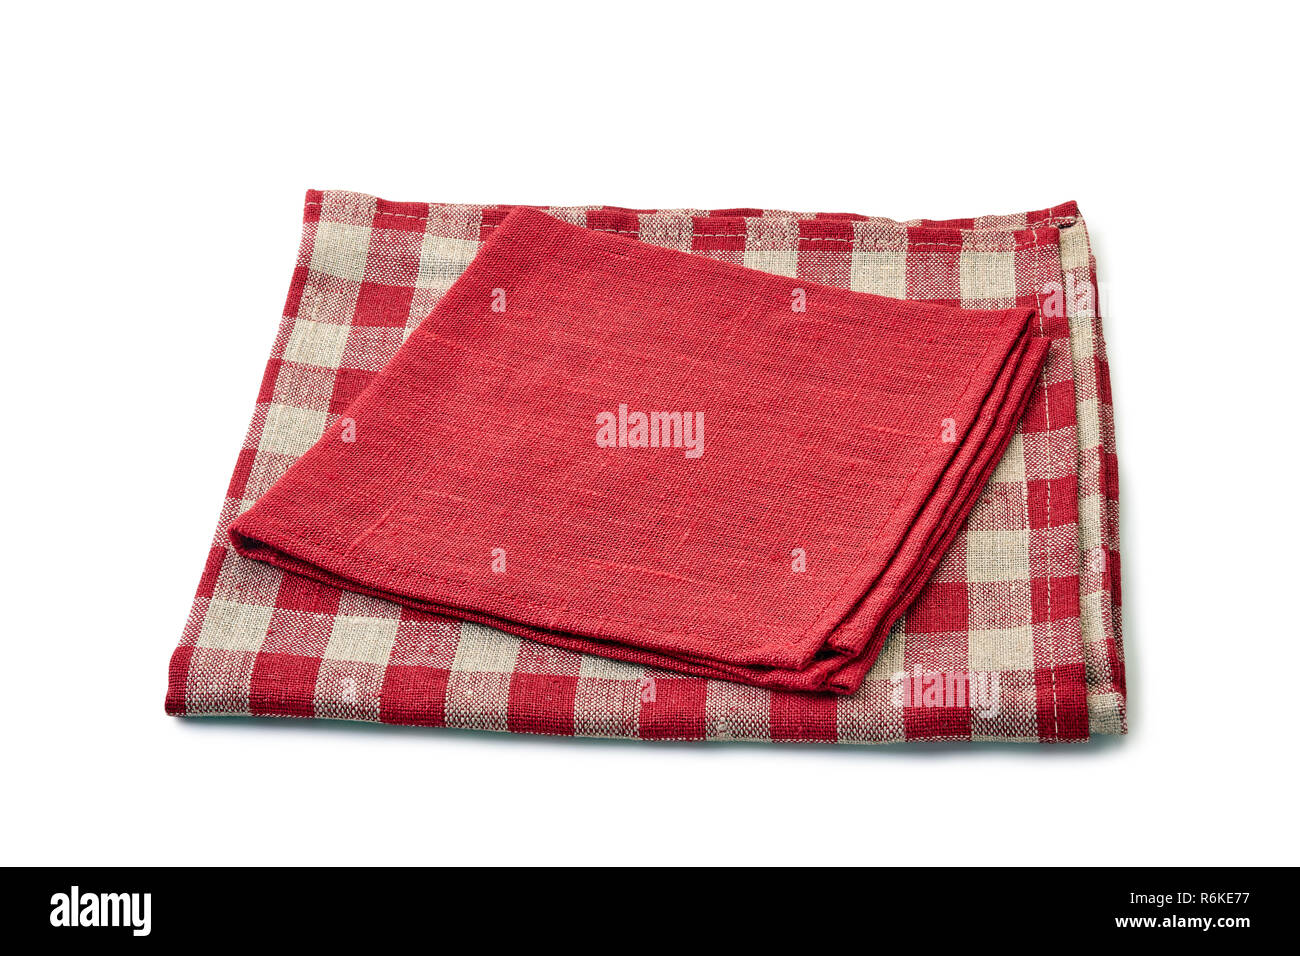 Red and red-checkered textile napkins on white background Stock Photo